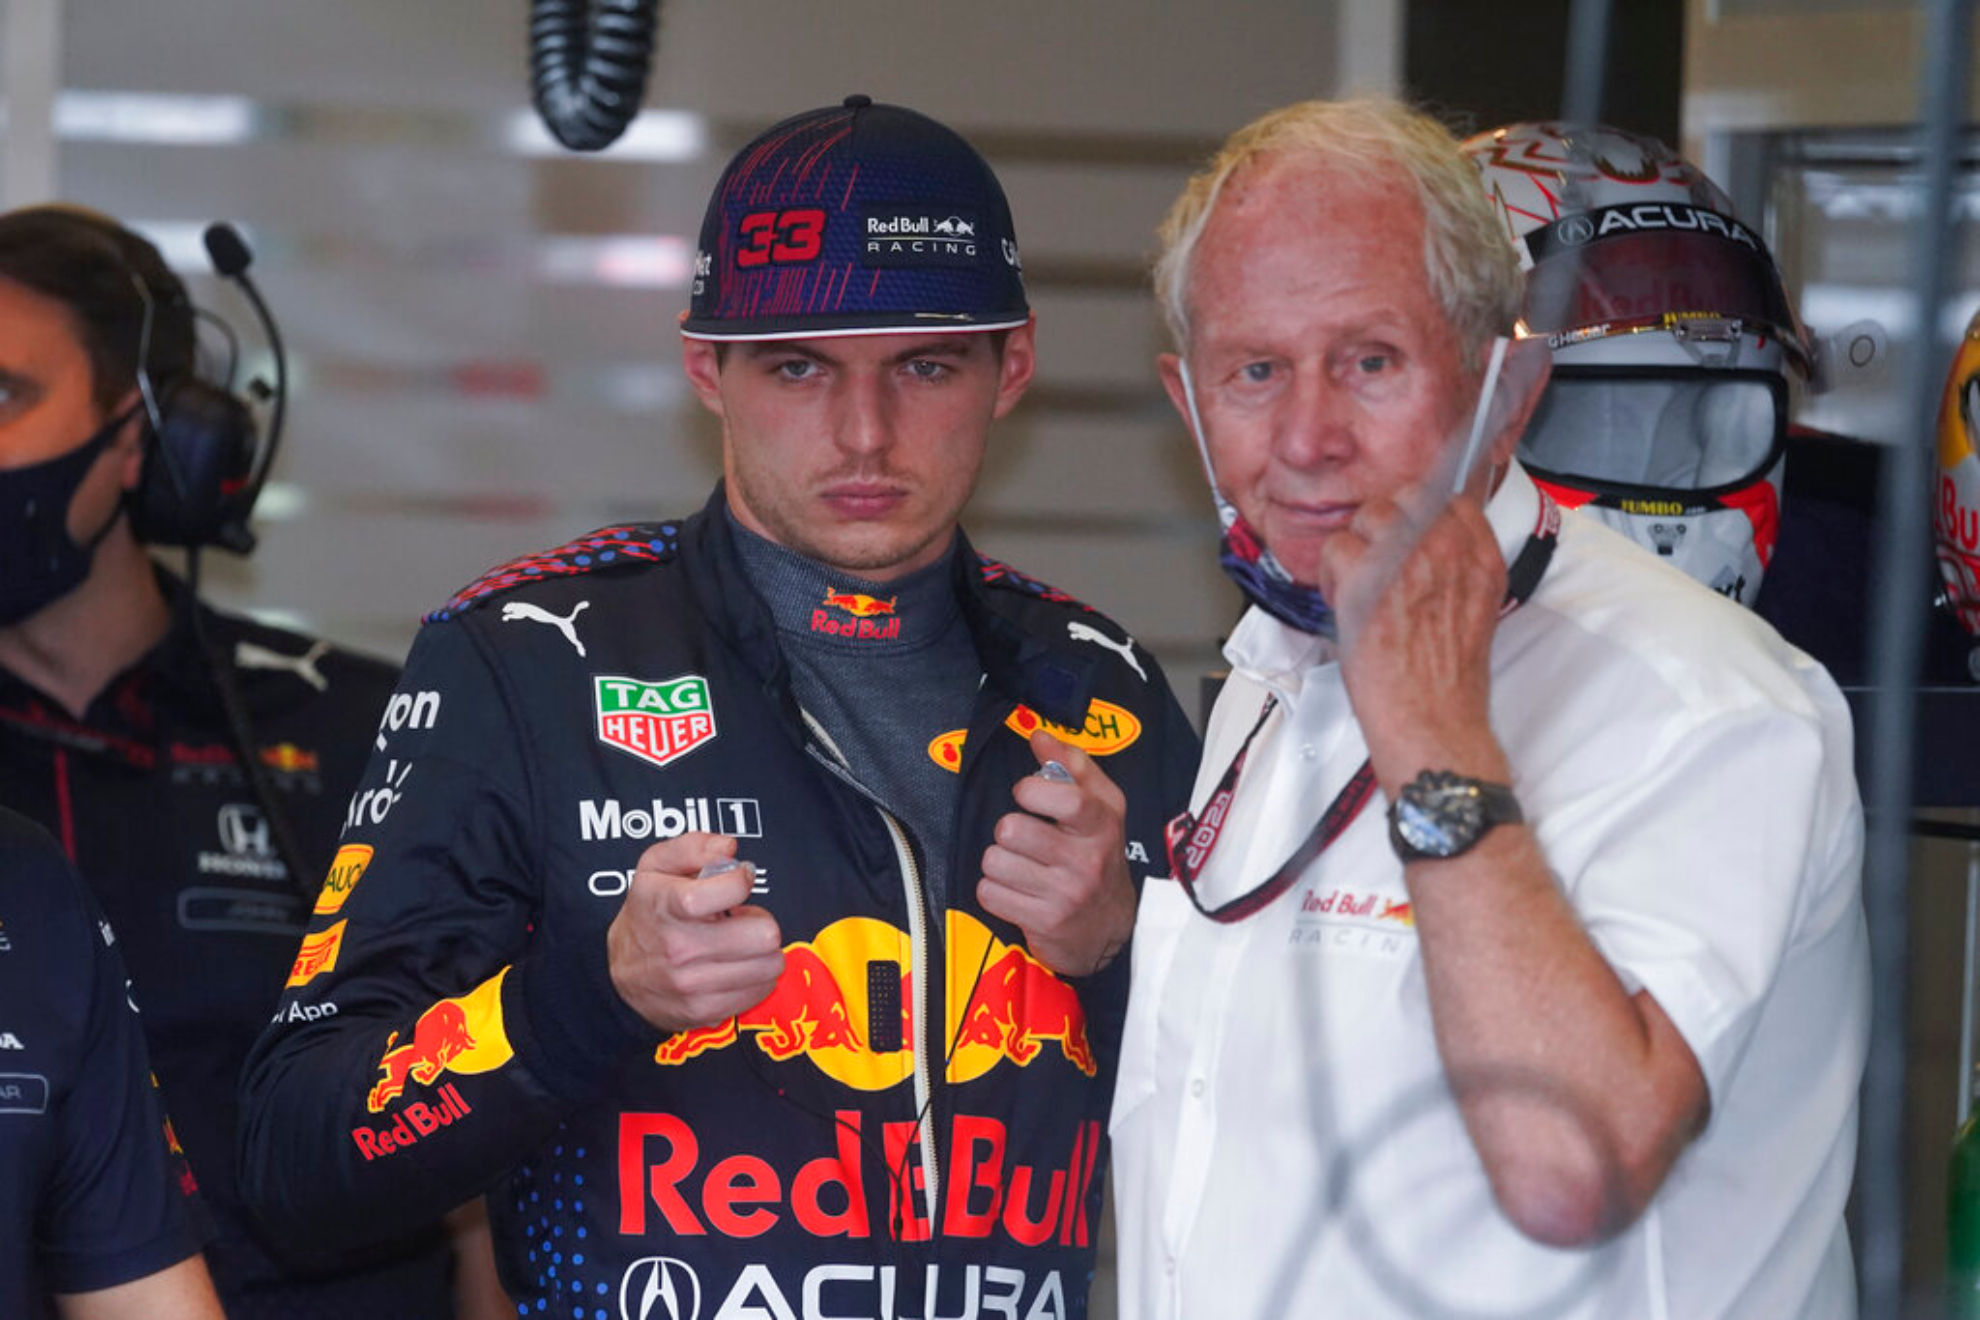 Helmut Marko back at it against Checo Perez: "An unhappy day, he couldn't cope with Max Verstappen's speed"